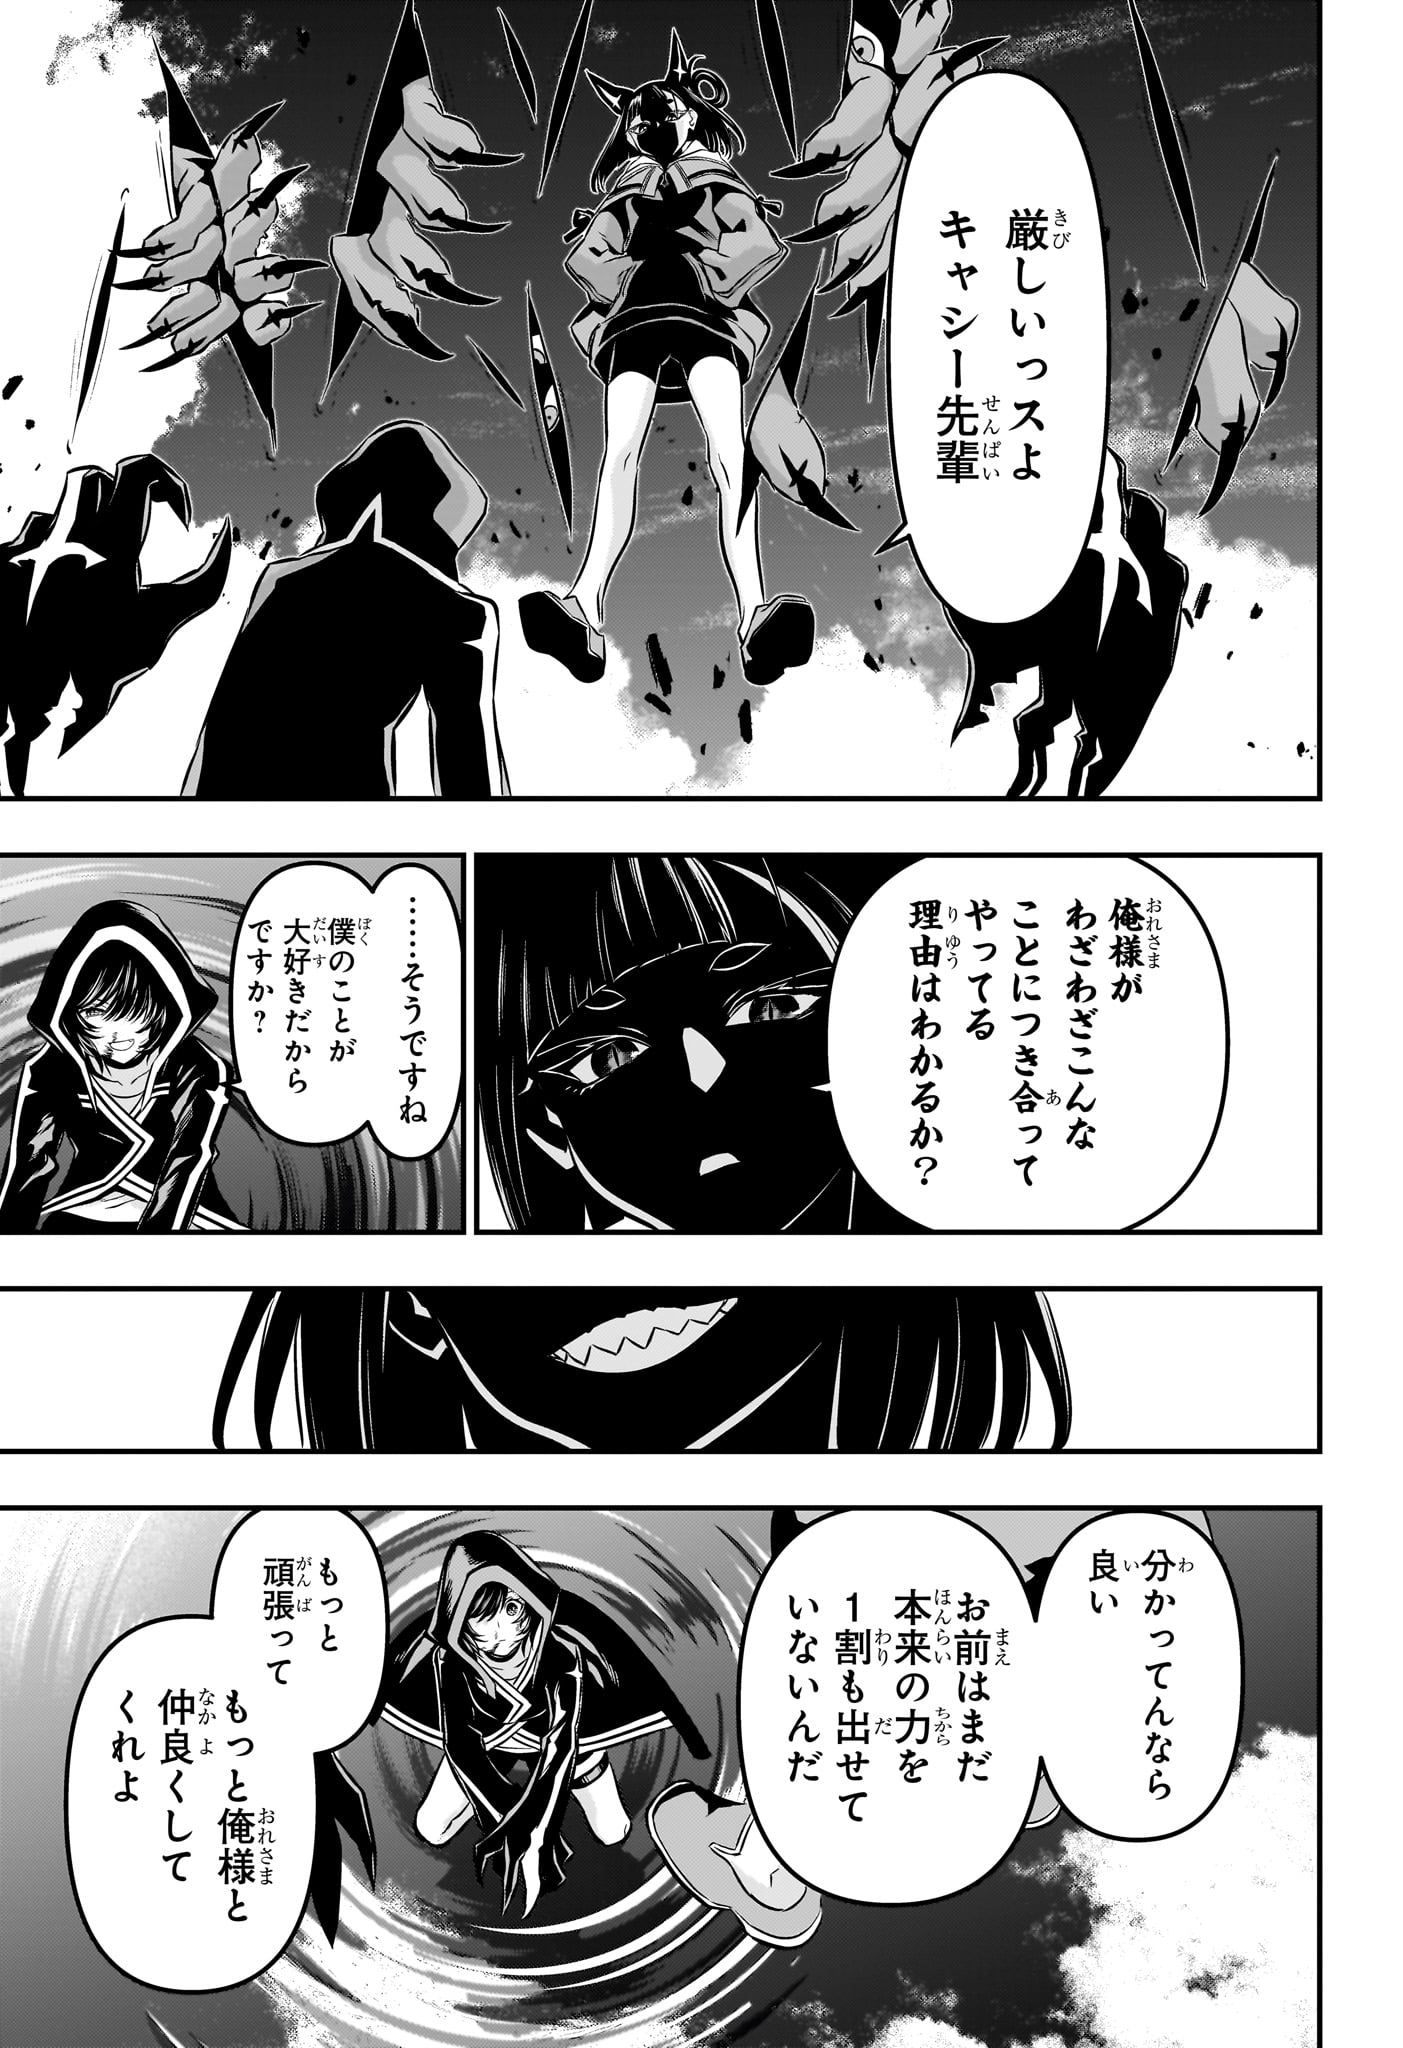 Nue no Onmyouji - Chapter 47 - Page 11